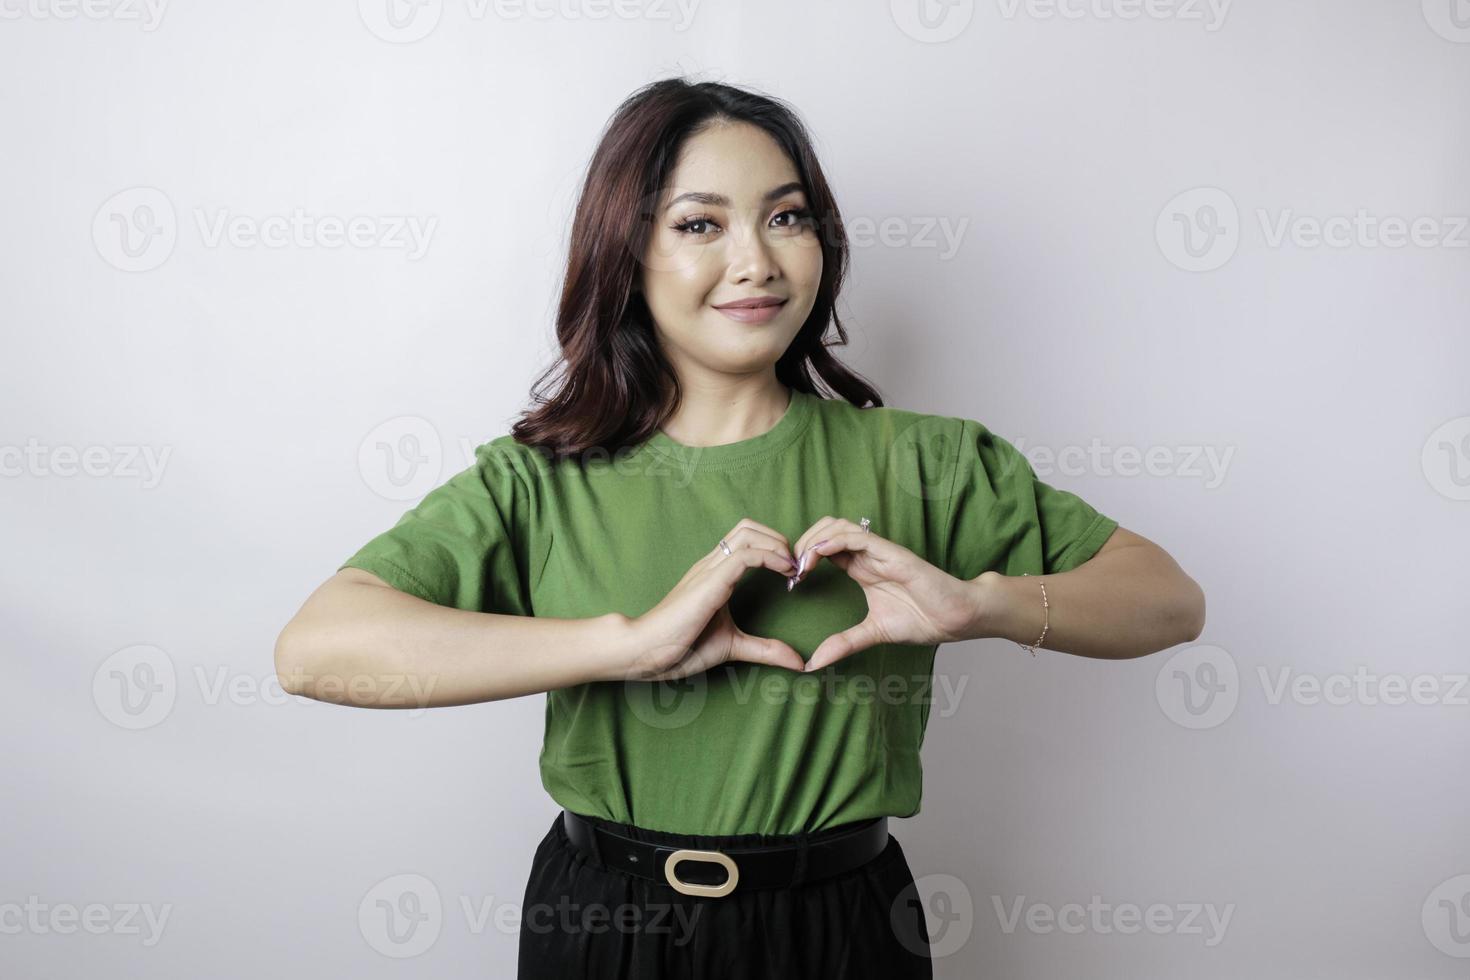 An attractive young Asian woman wearing a green t-shirt feels happy and a romantic shapes heart gesture expresses tender feelings photo